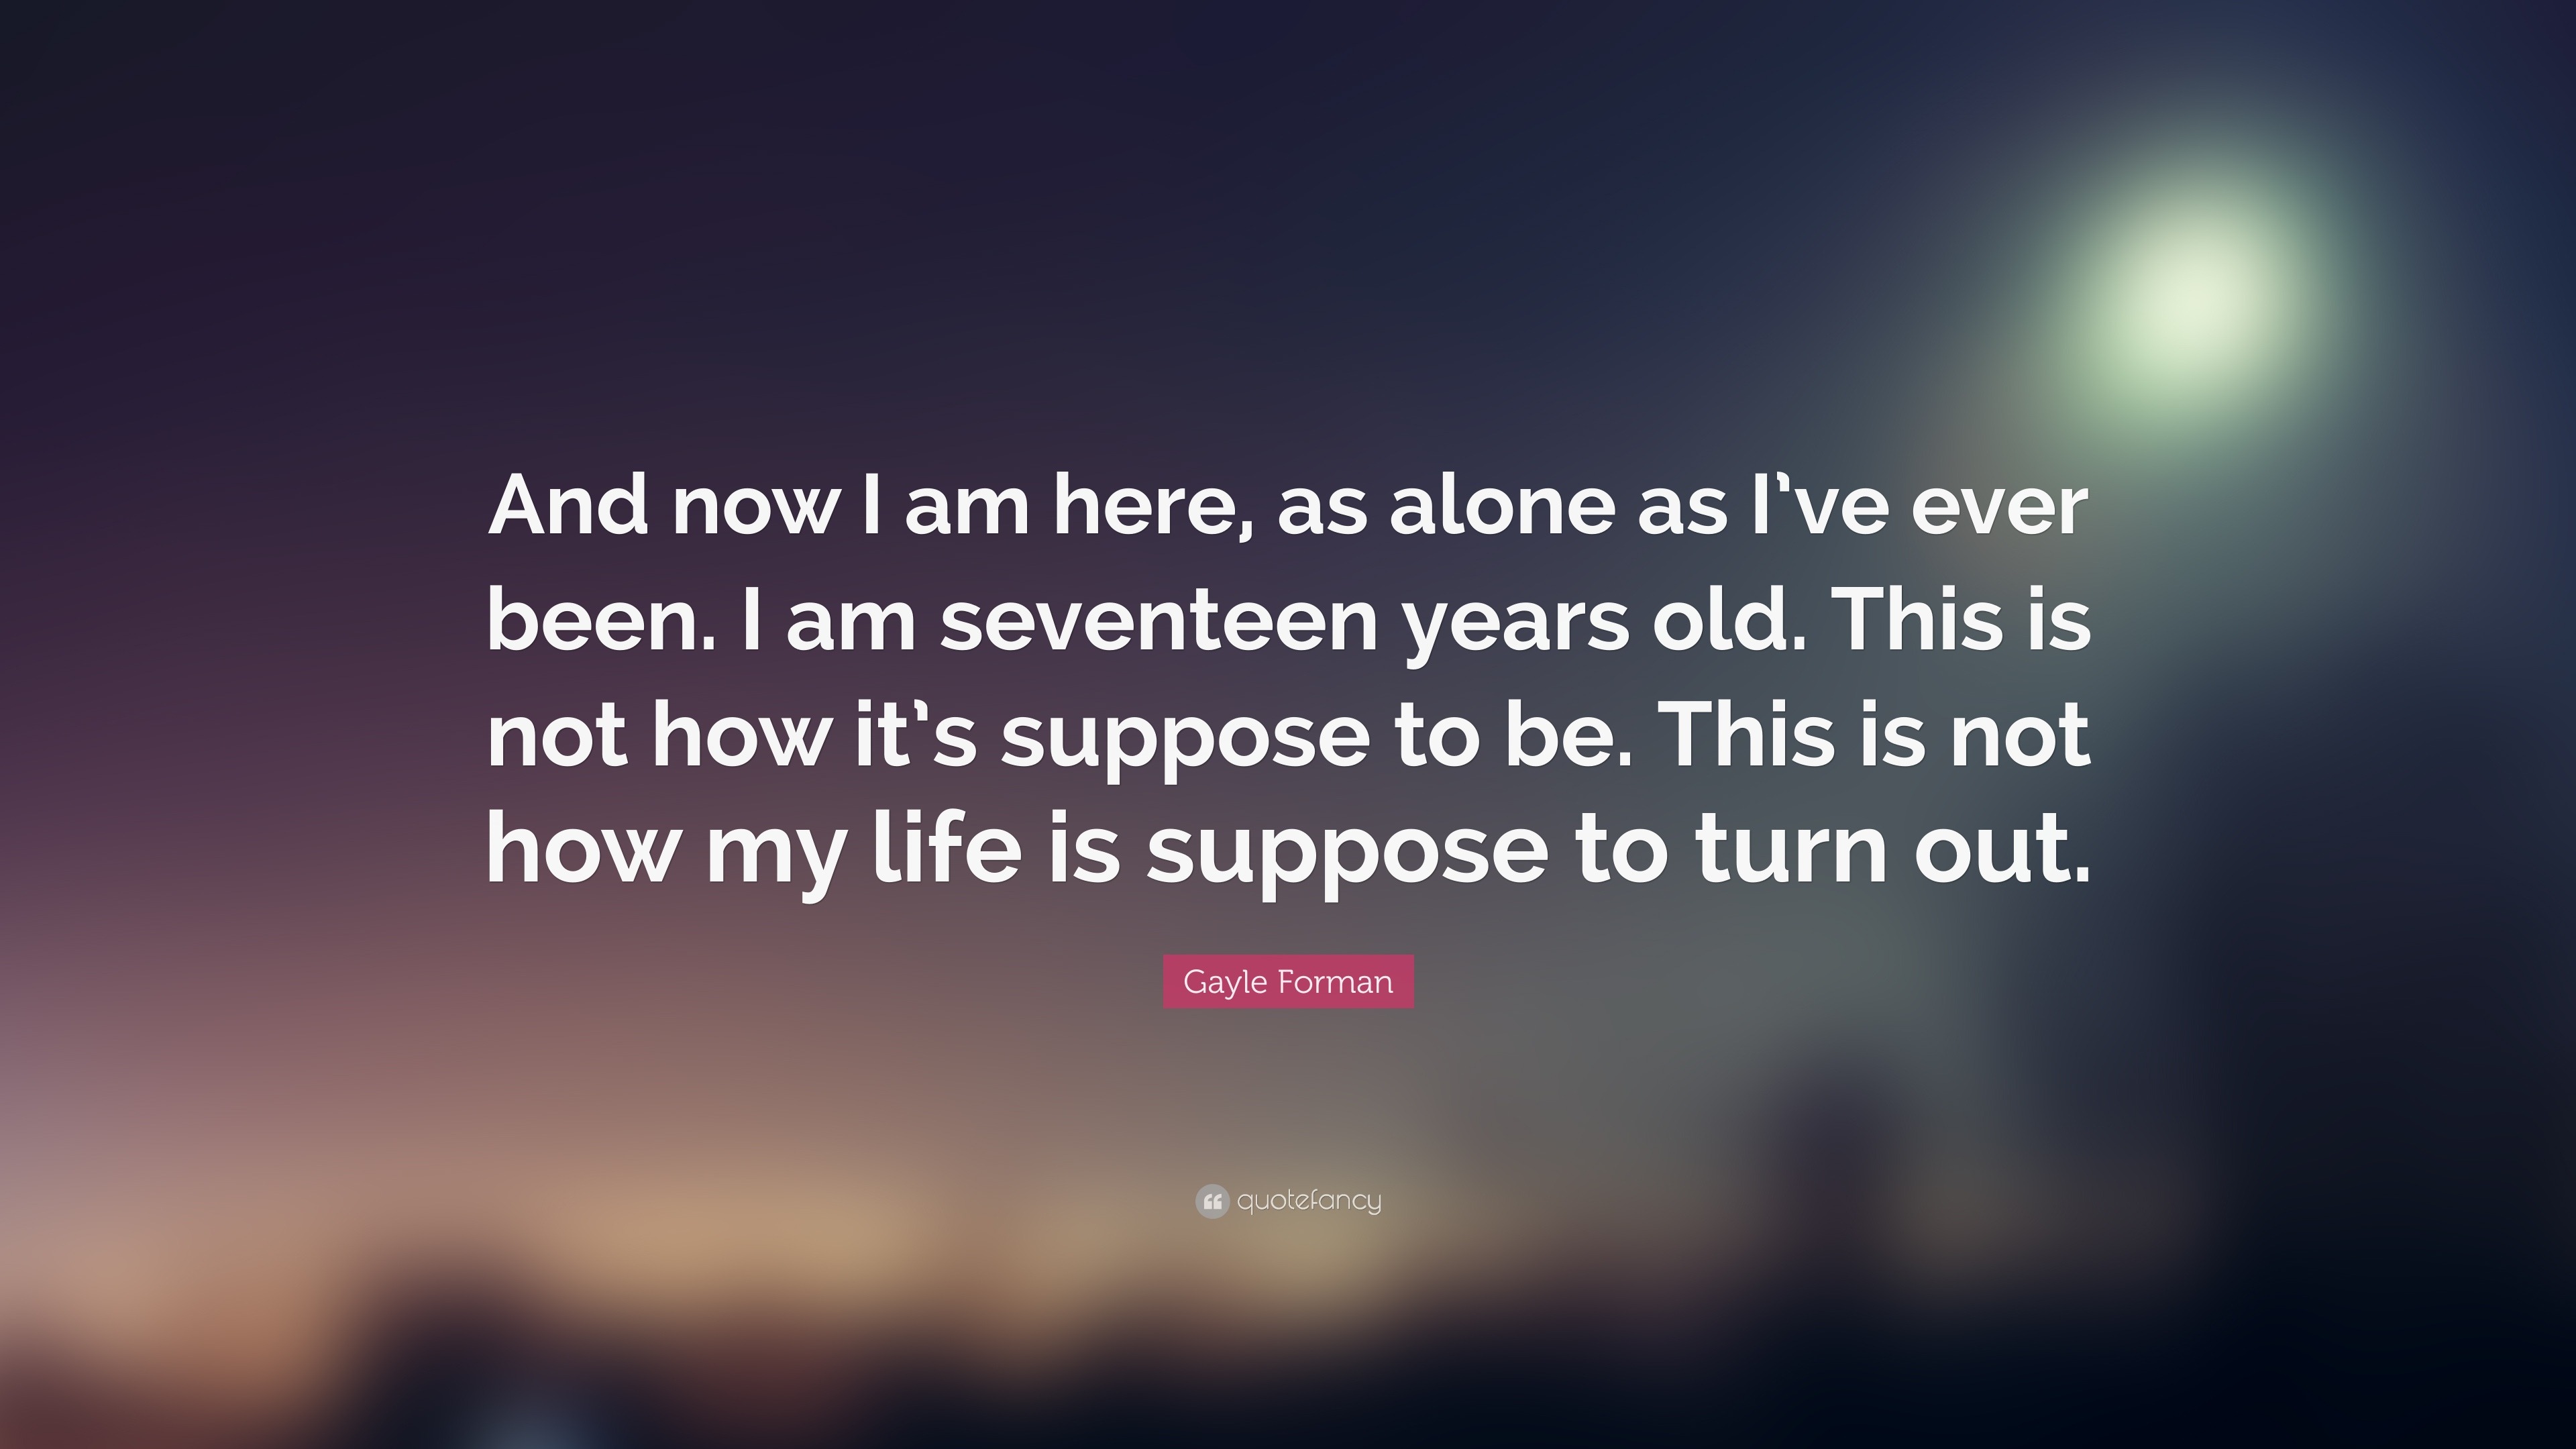 Gayle Forman Quote: “And Now I Am Here, As Alone As I've Ever Been. I Am Seventeen Years Old. This Is Not How It's Suppose To Be. This Is Not...”